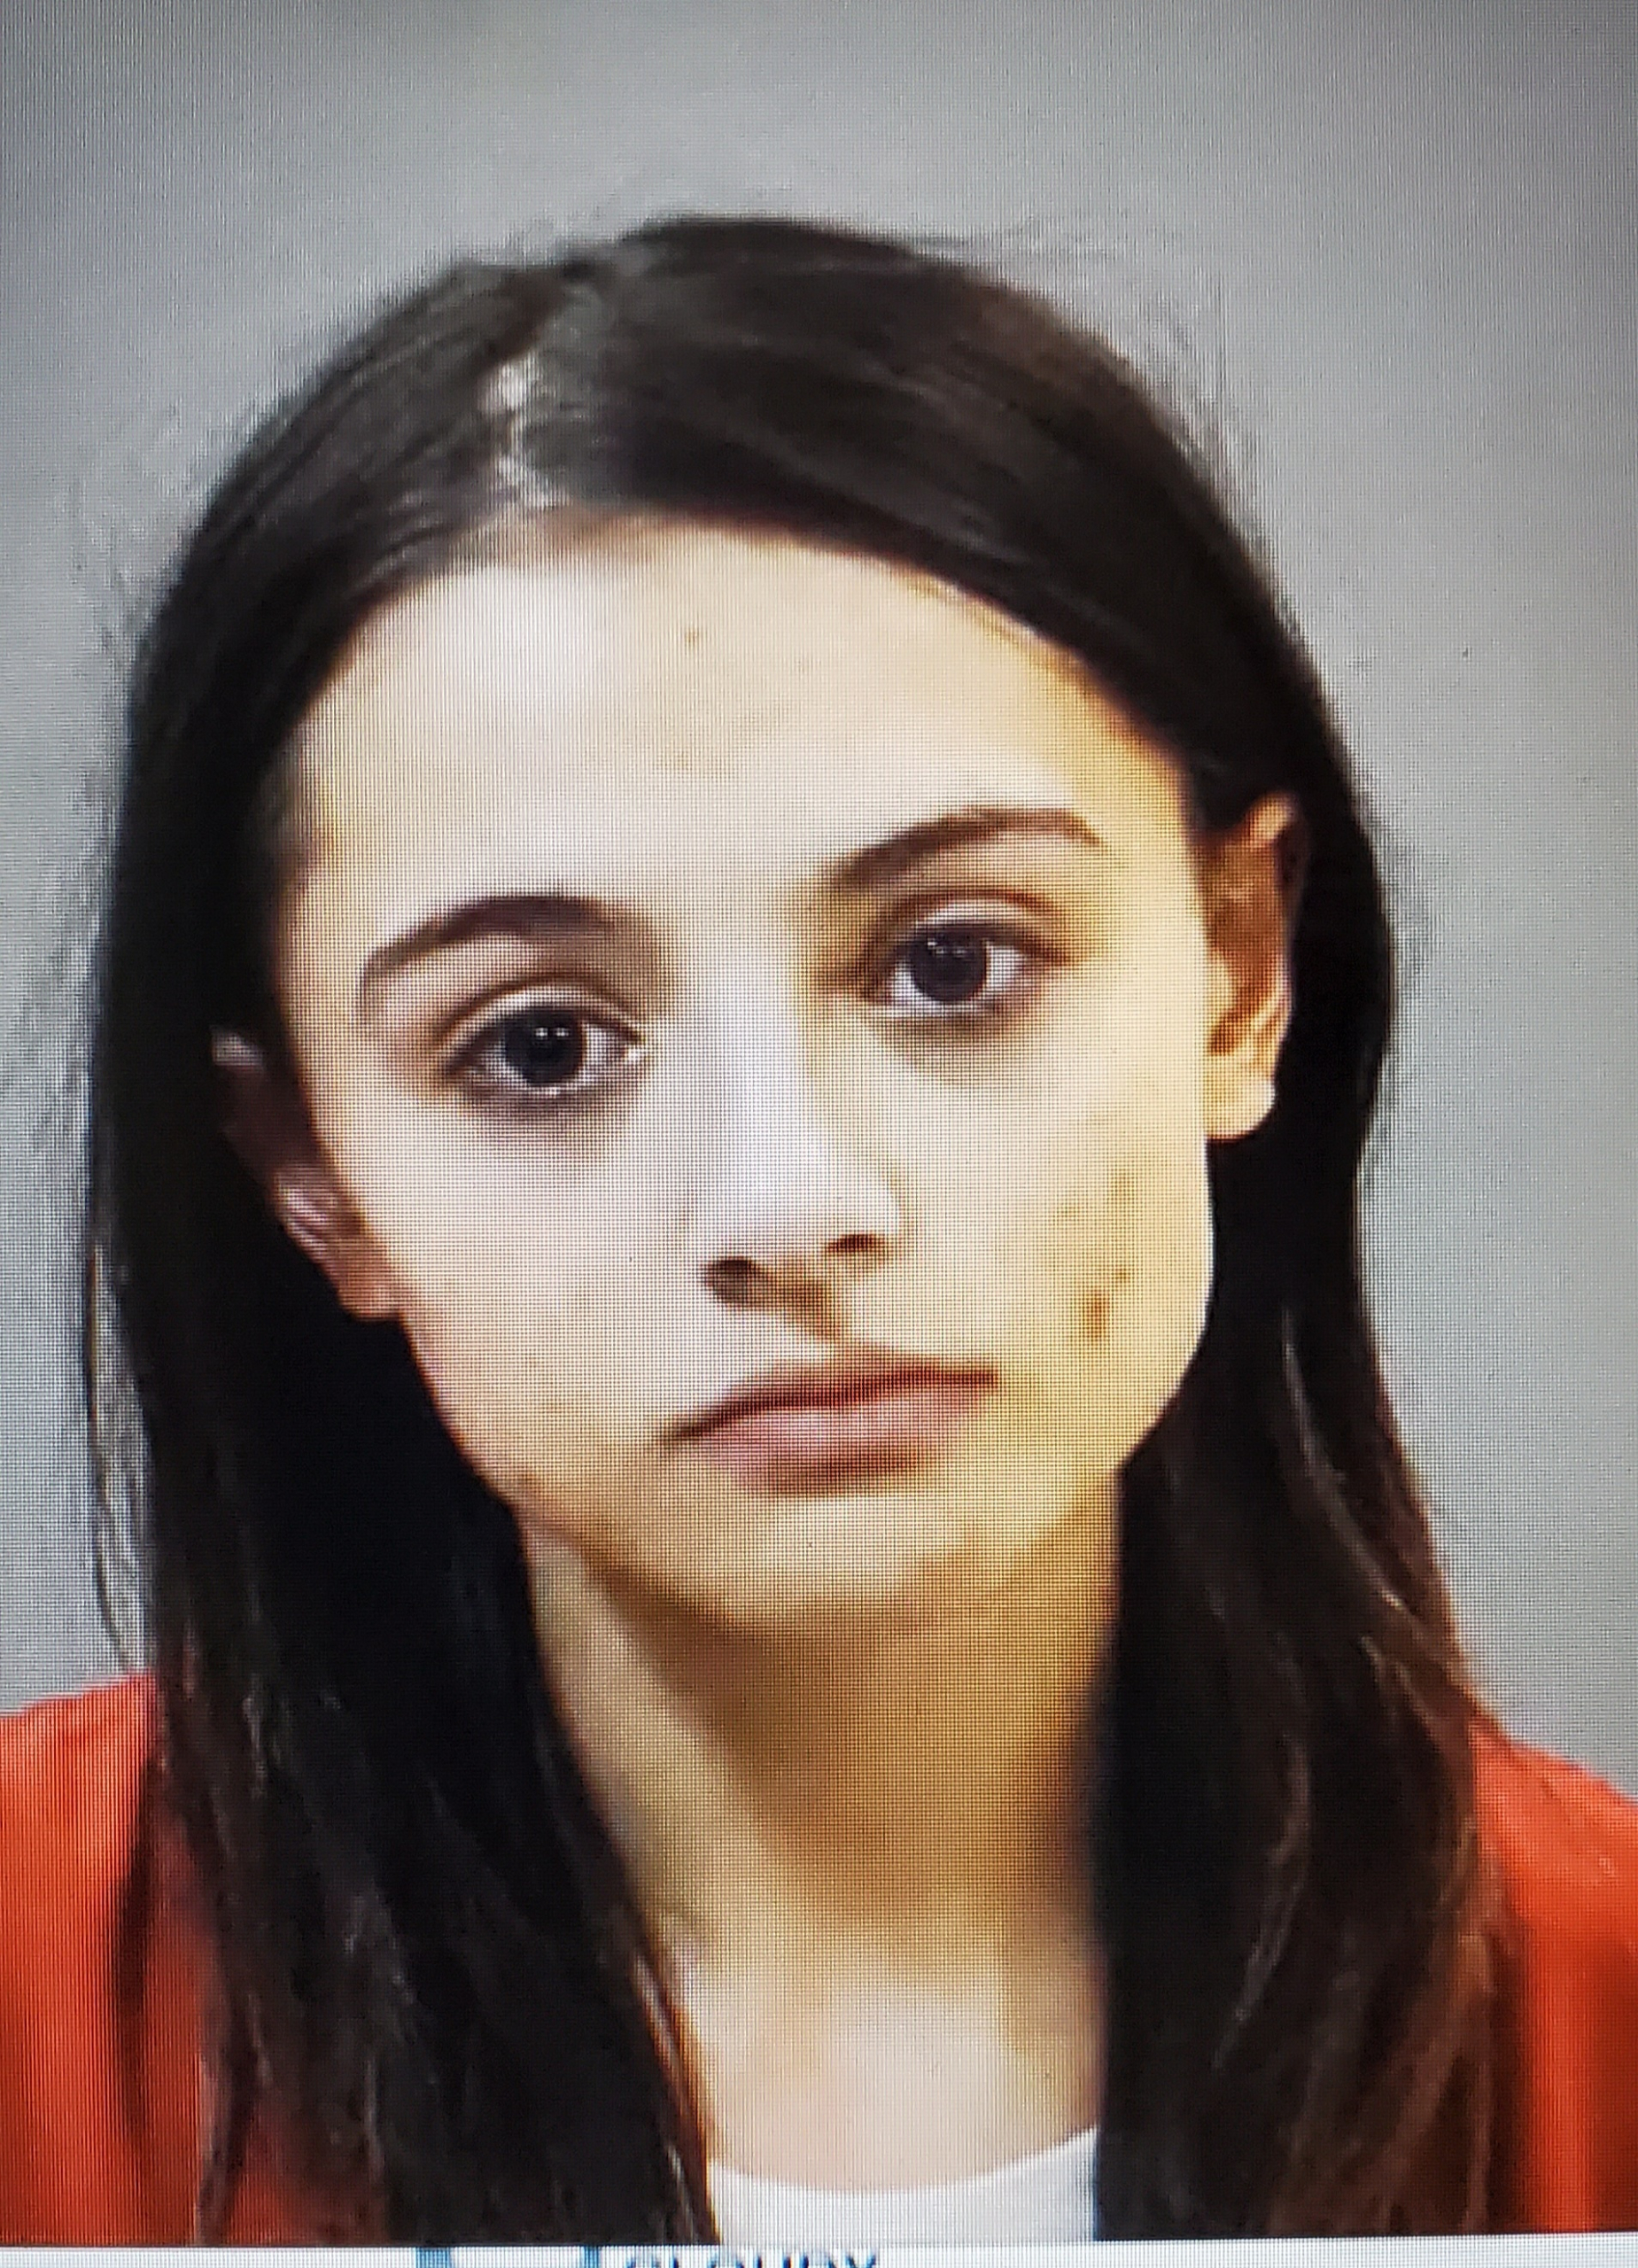 An 18 year-old Woman is Arrested for Making Threat Against a Knox County School